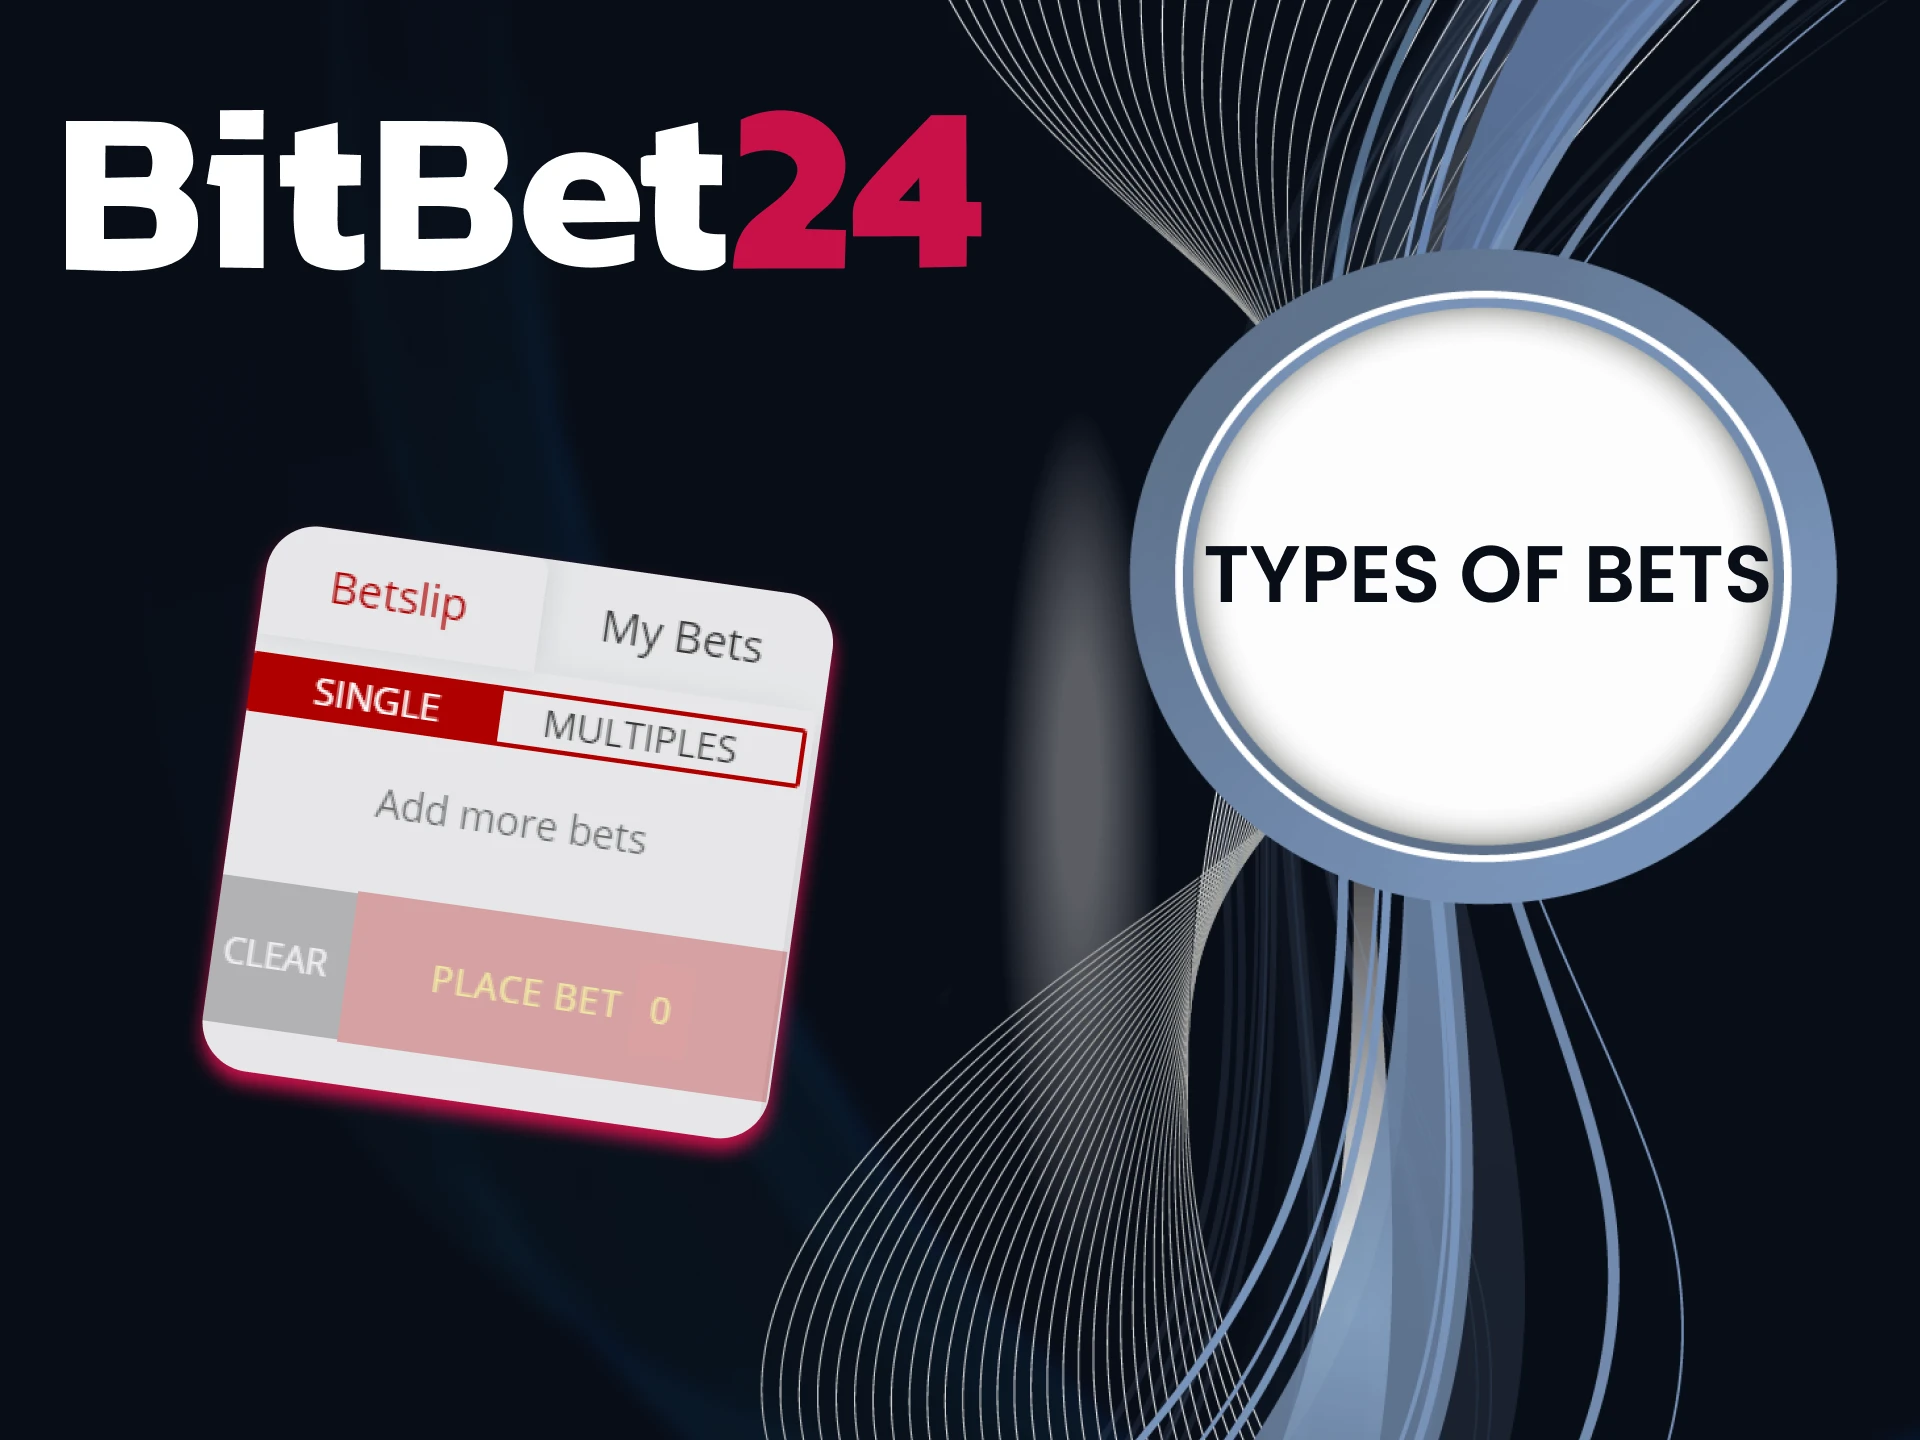 At BitBet24 try the best types of bets.